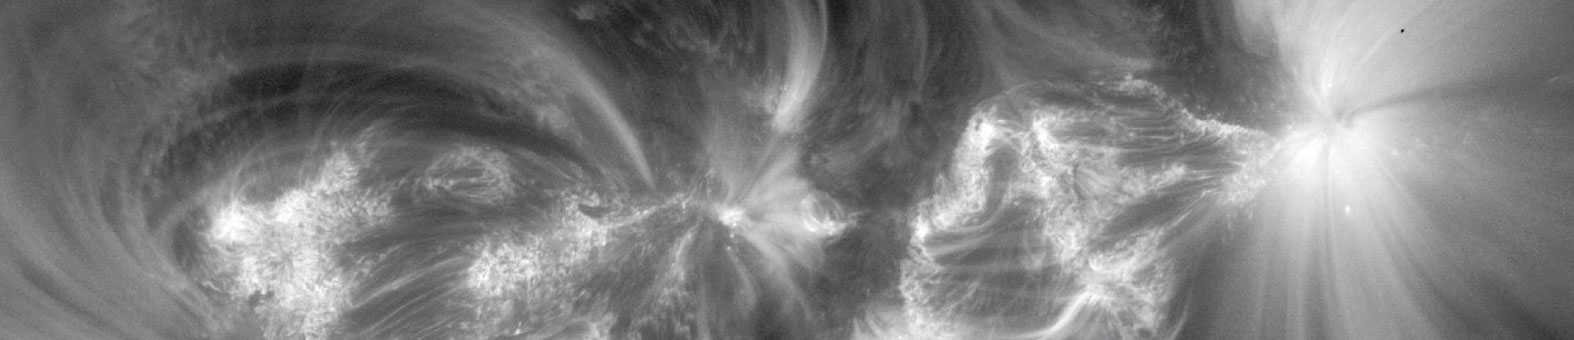 Go to press release: Latest research provides SwRI scientists close-up views of energetic particle jets ejected from the Sun